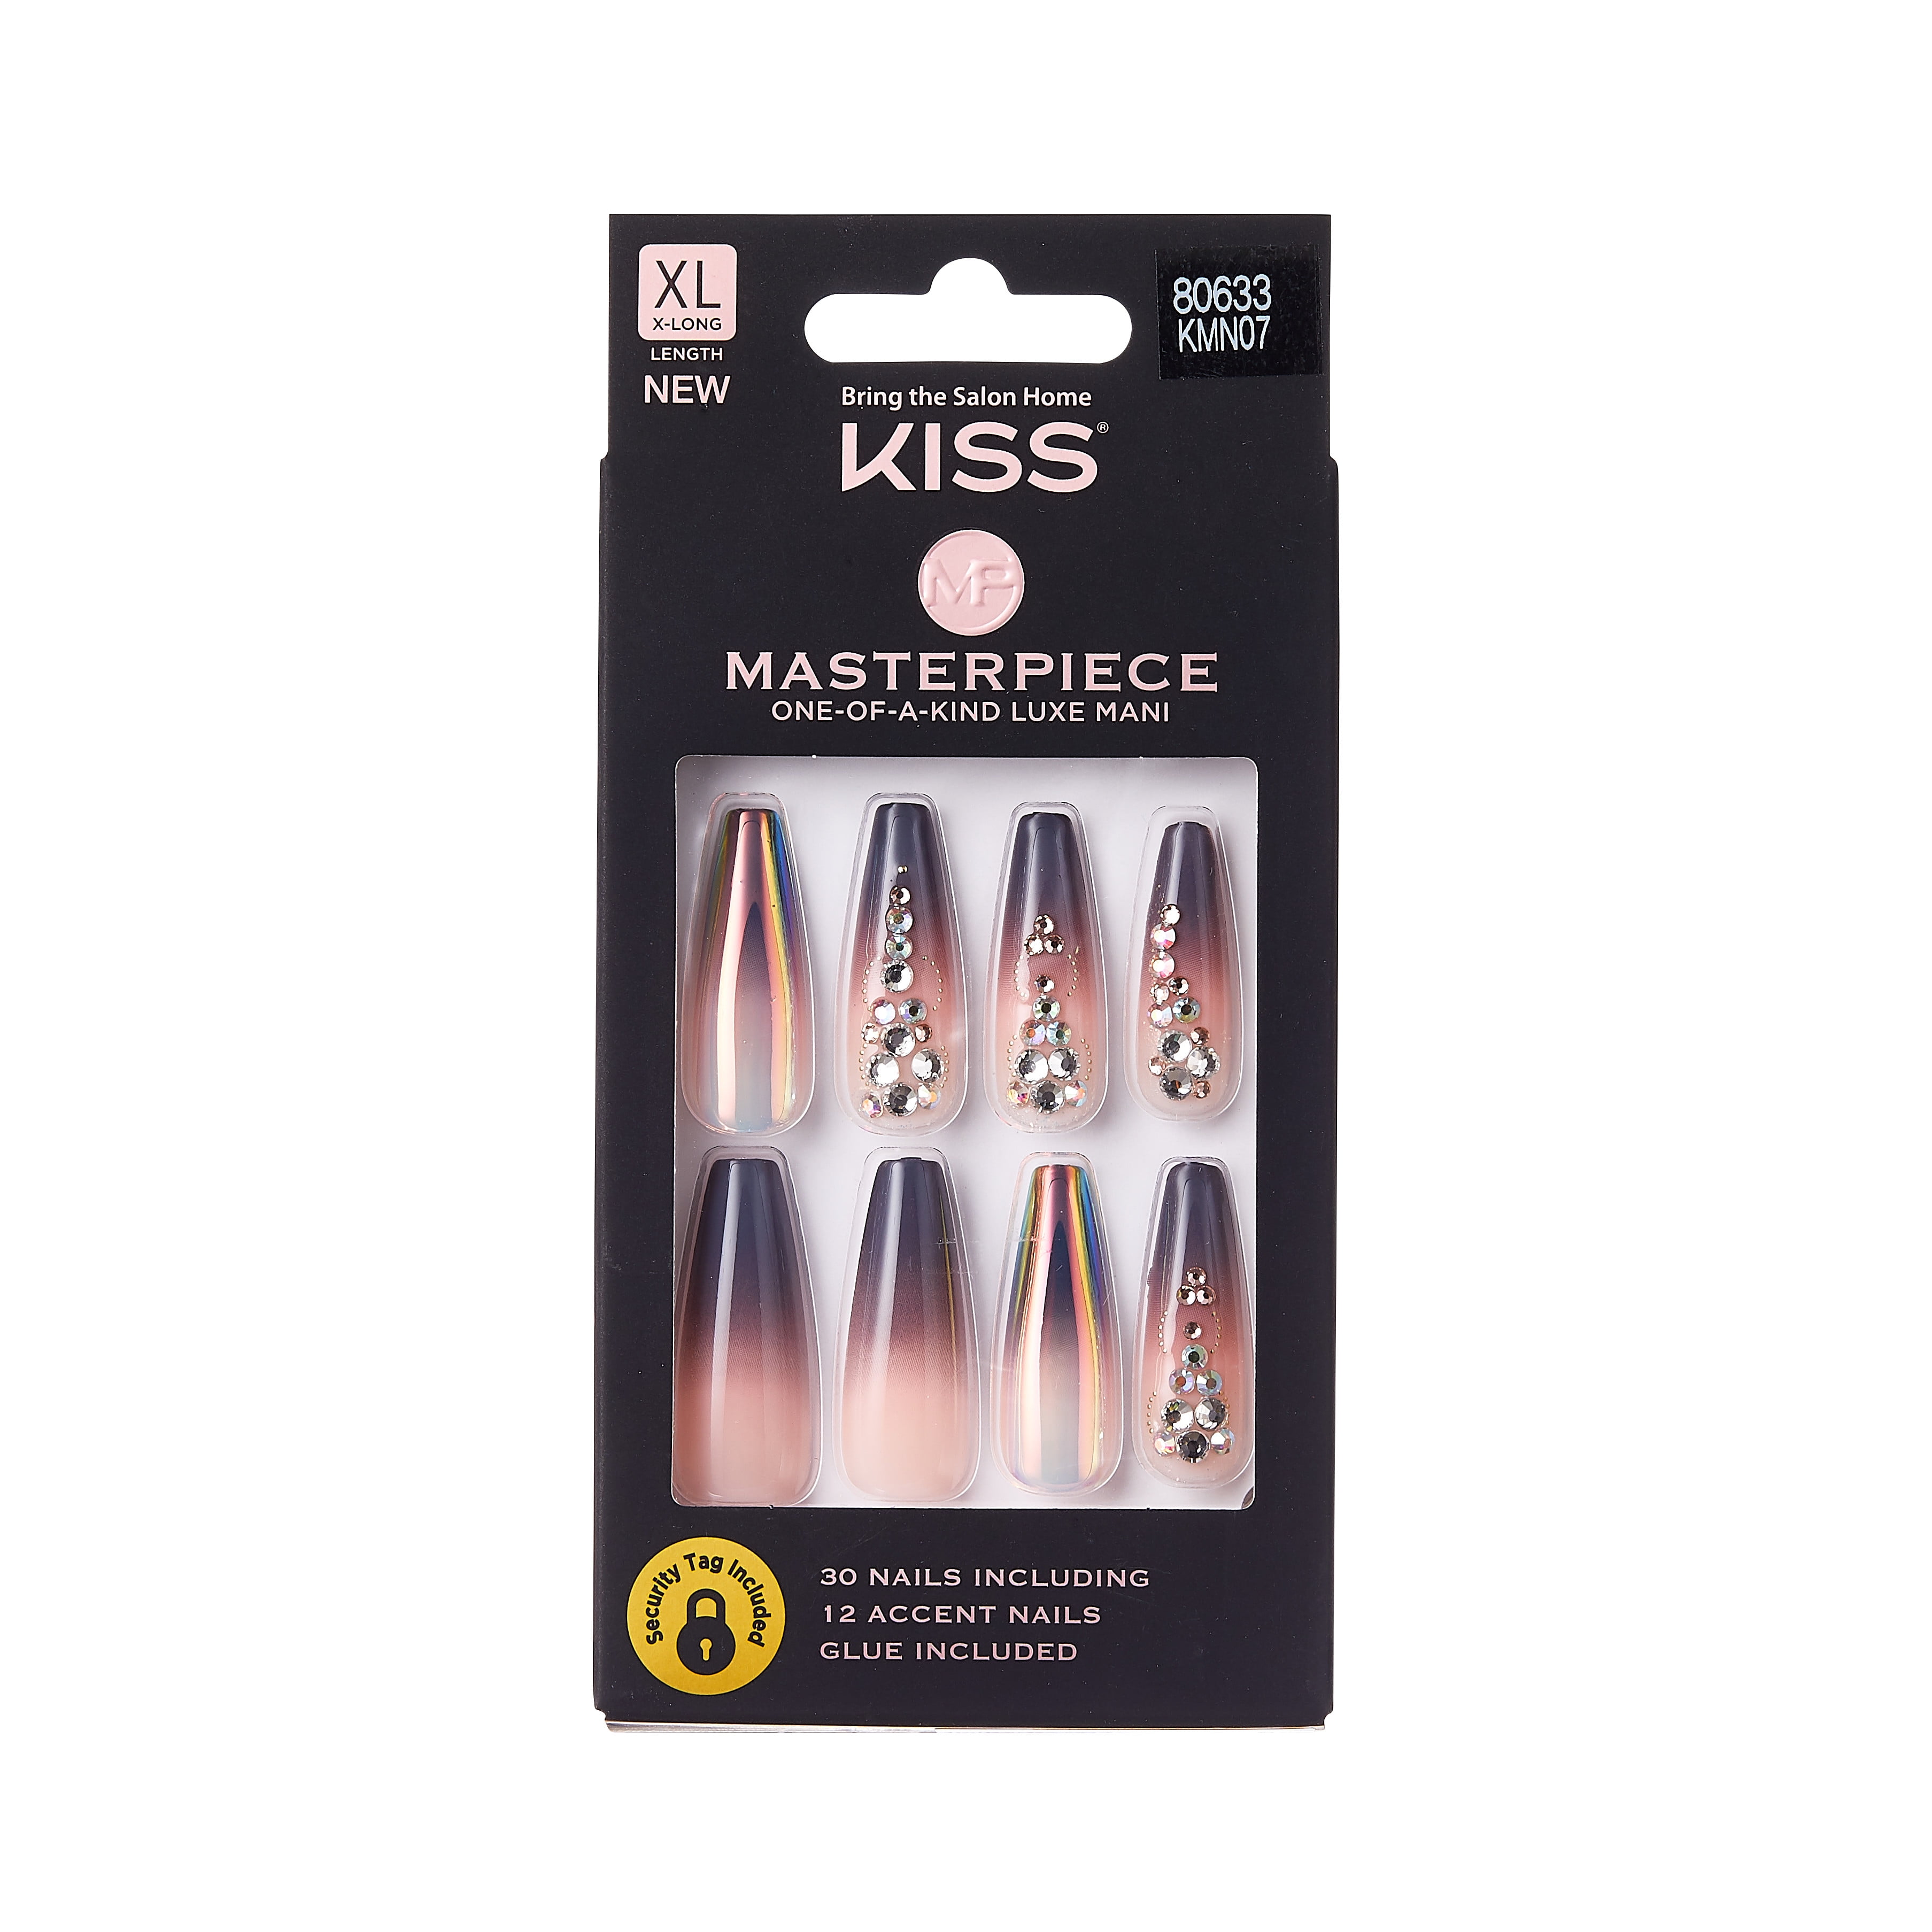 KISS Masterpiece One-Of-A-Kind Luxe Mani 30Nails #KMN07 – Super Sisters  Beauty